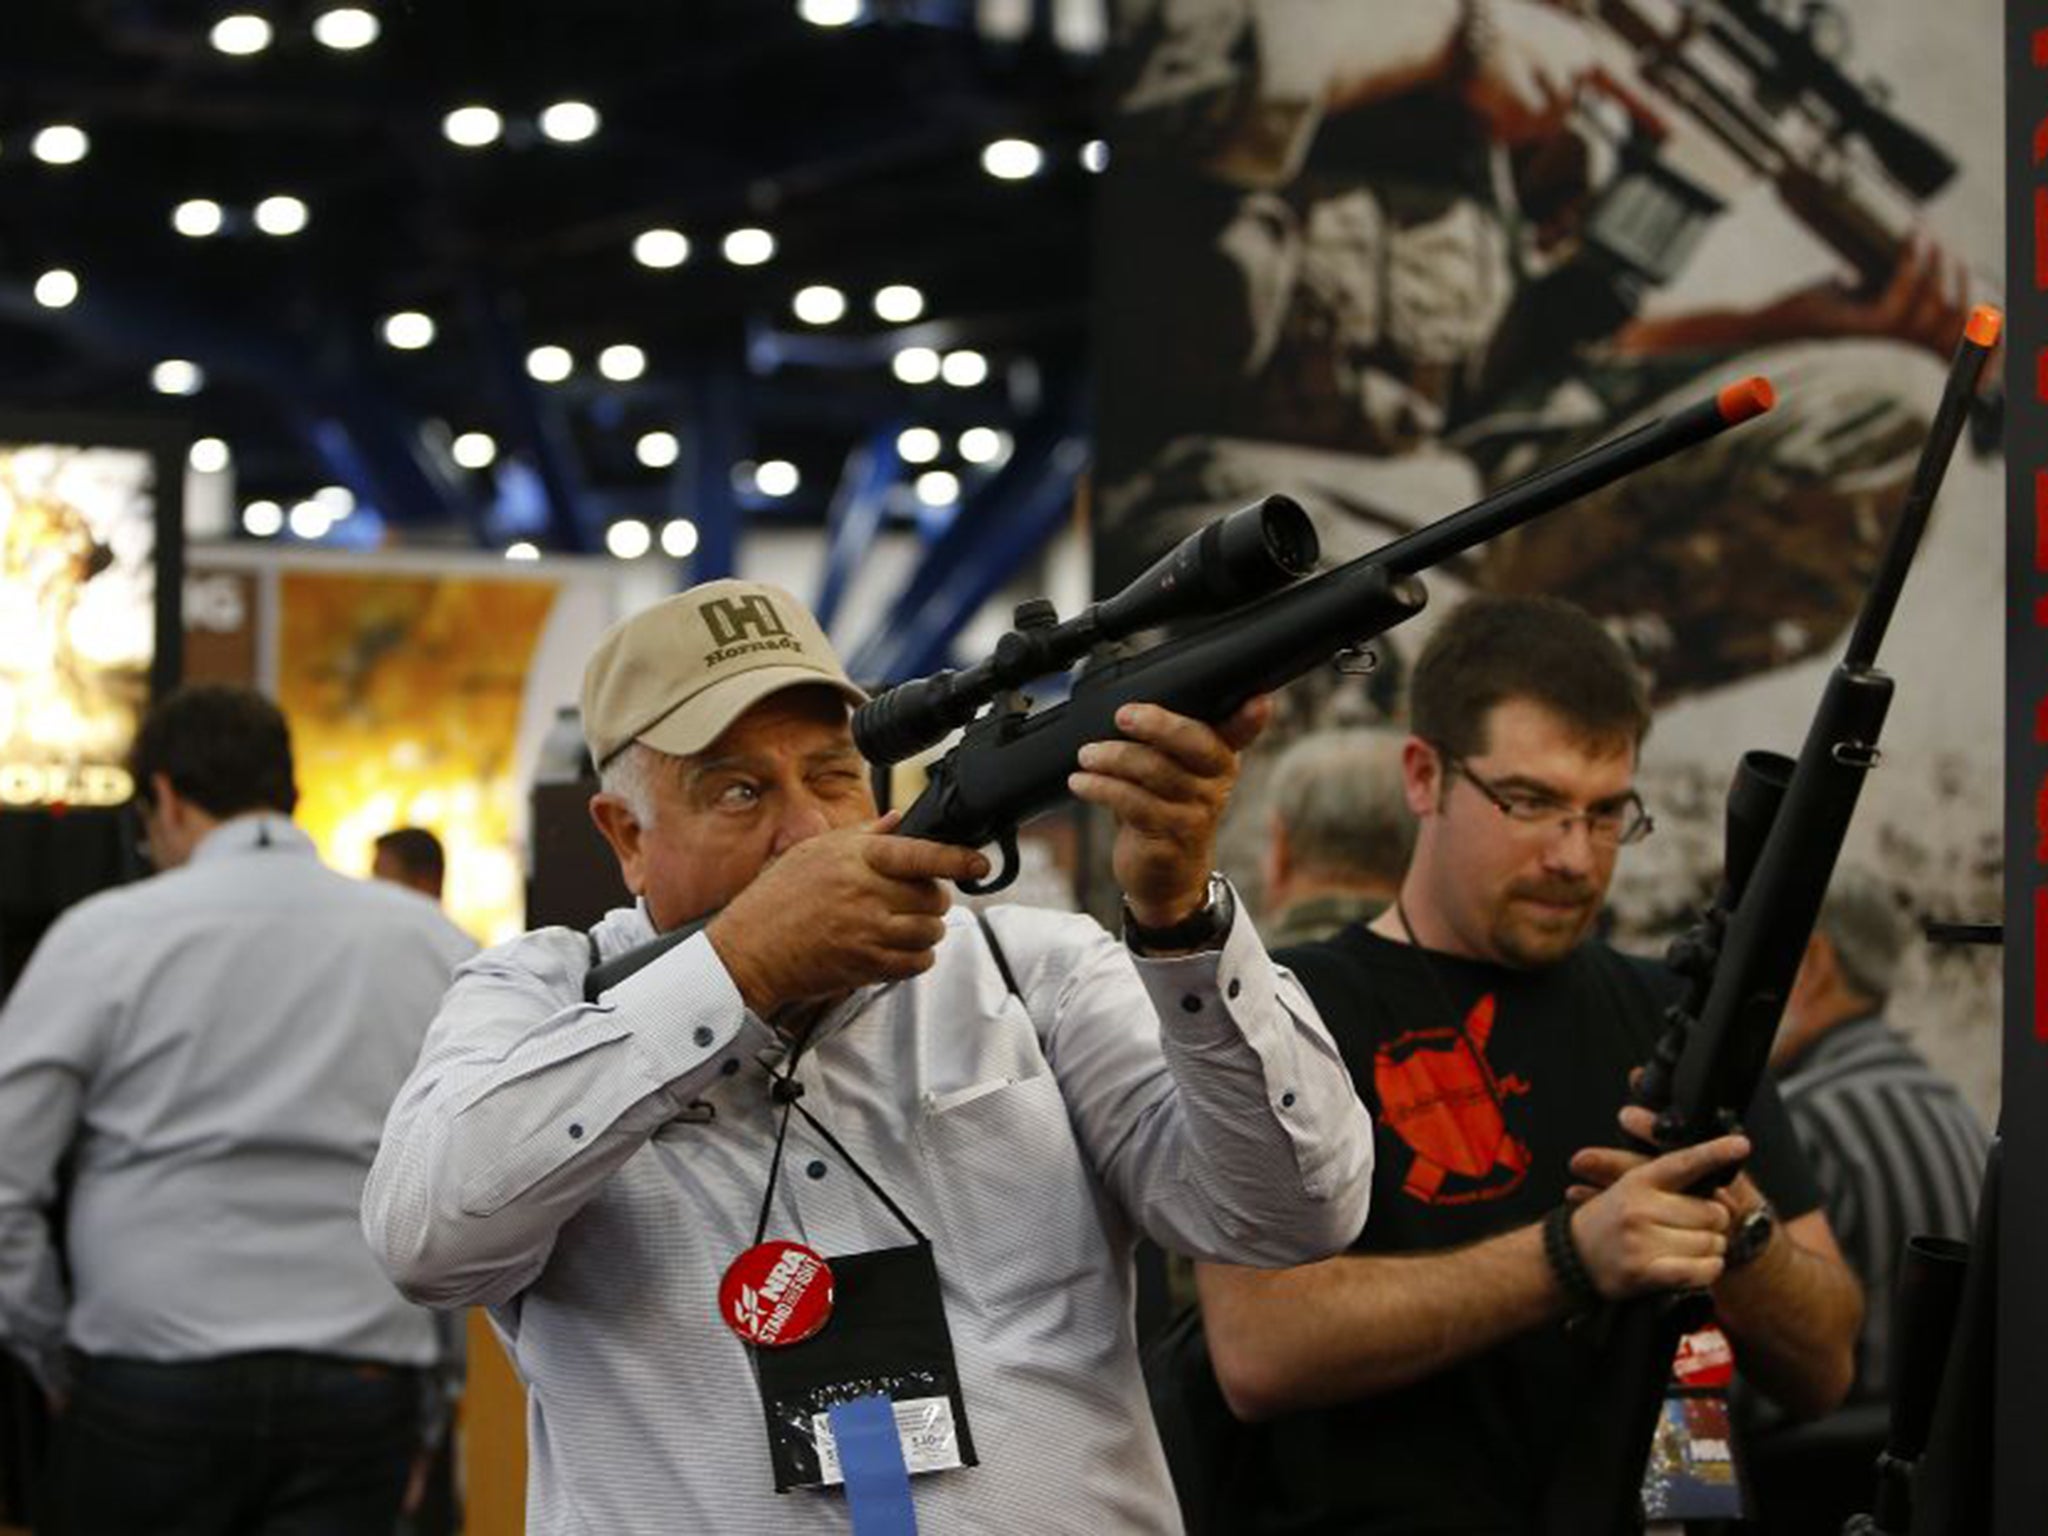 Conferences for gun owners are a big draw in Texas, where anti-Obama feeling has been inflamed by a US army exercise